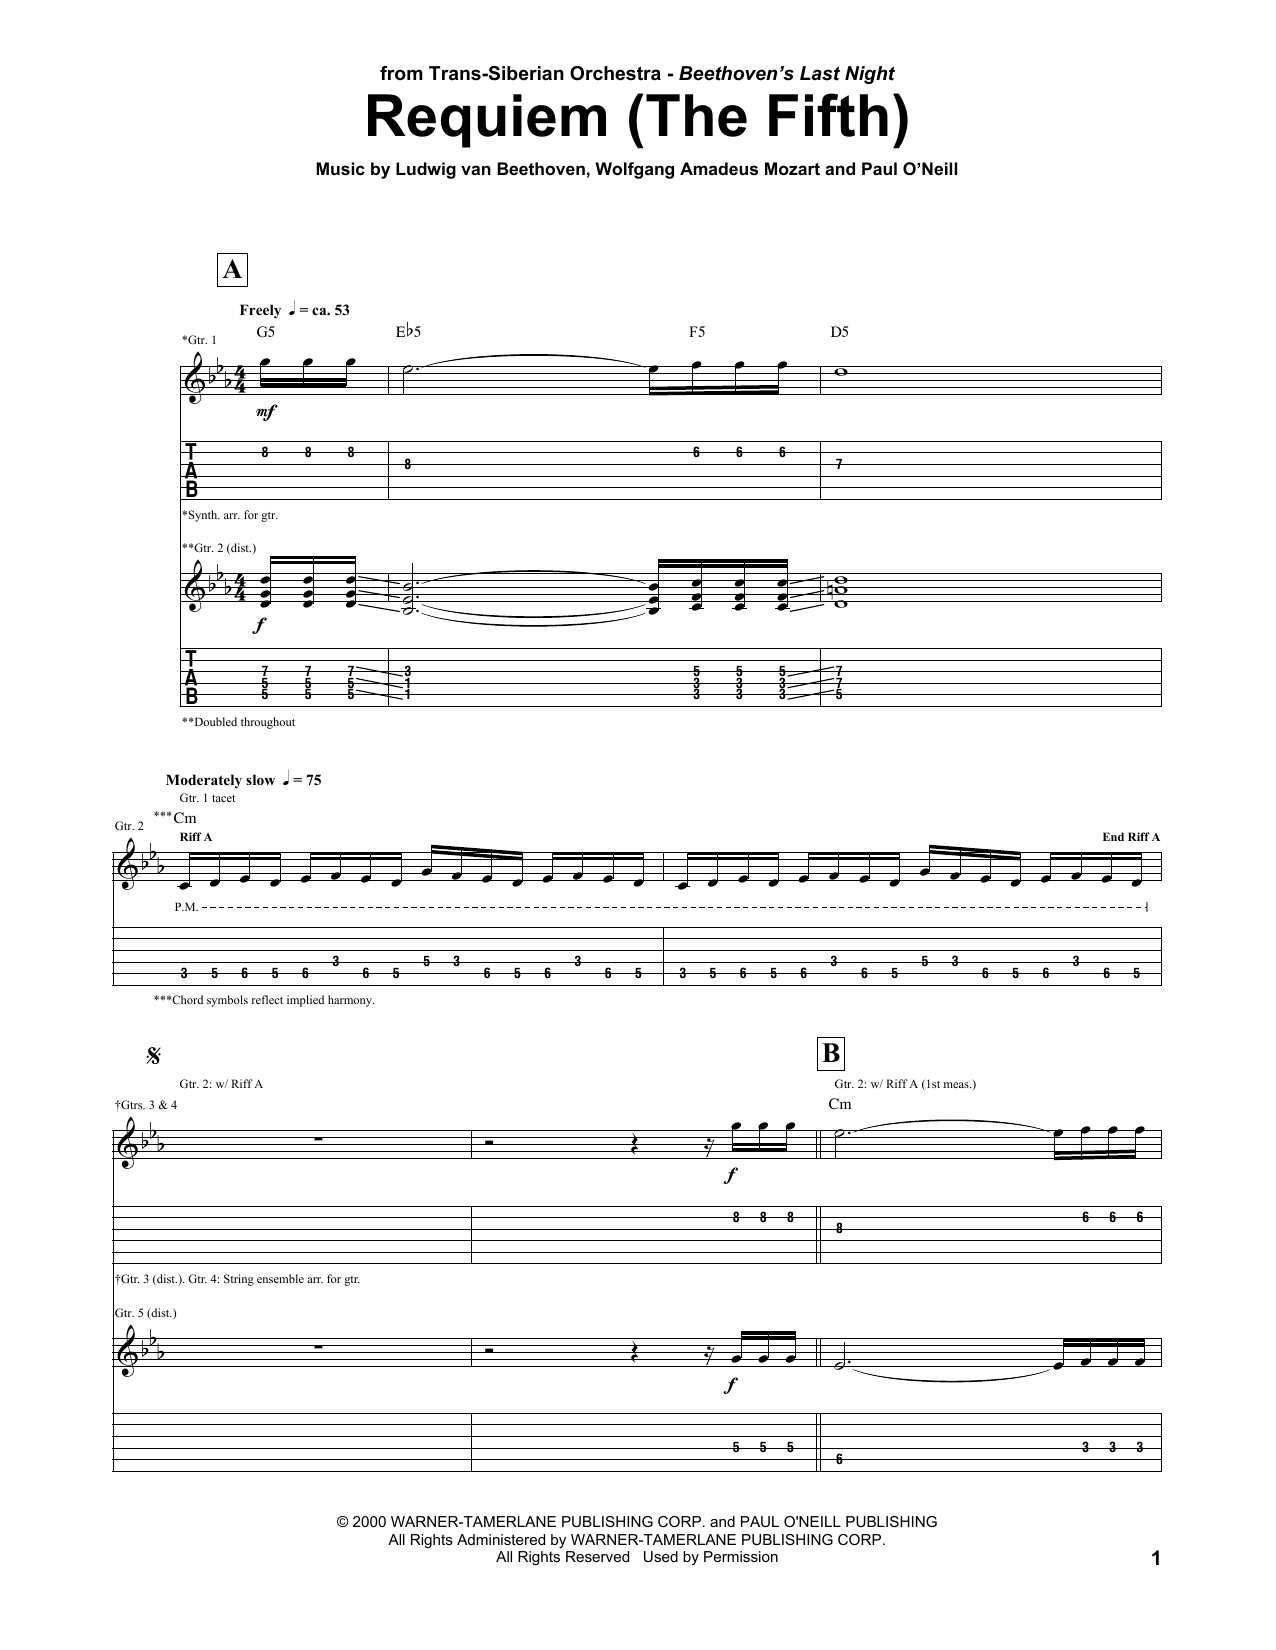 Download Trans-Siberian Orchestra Requiem (The Fifth) Sheet Music